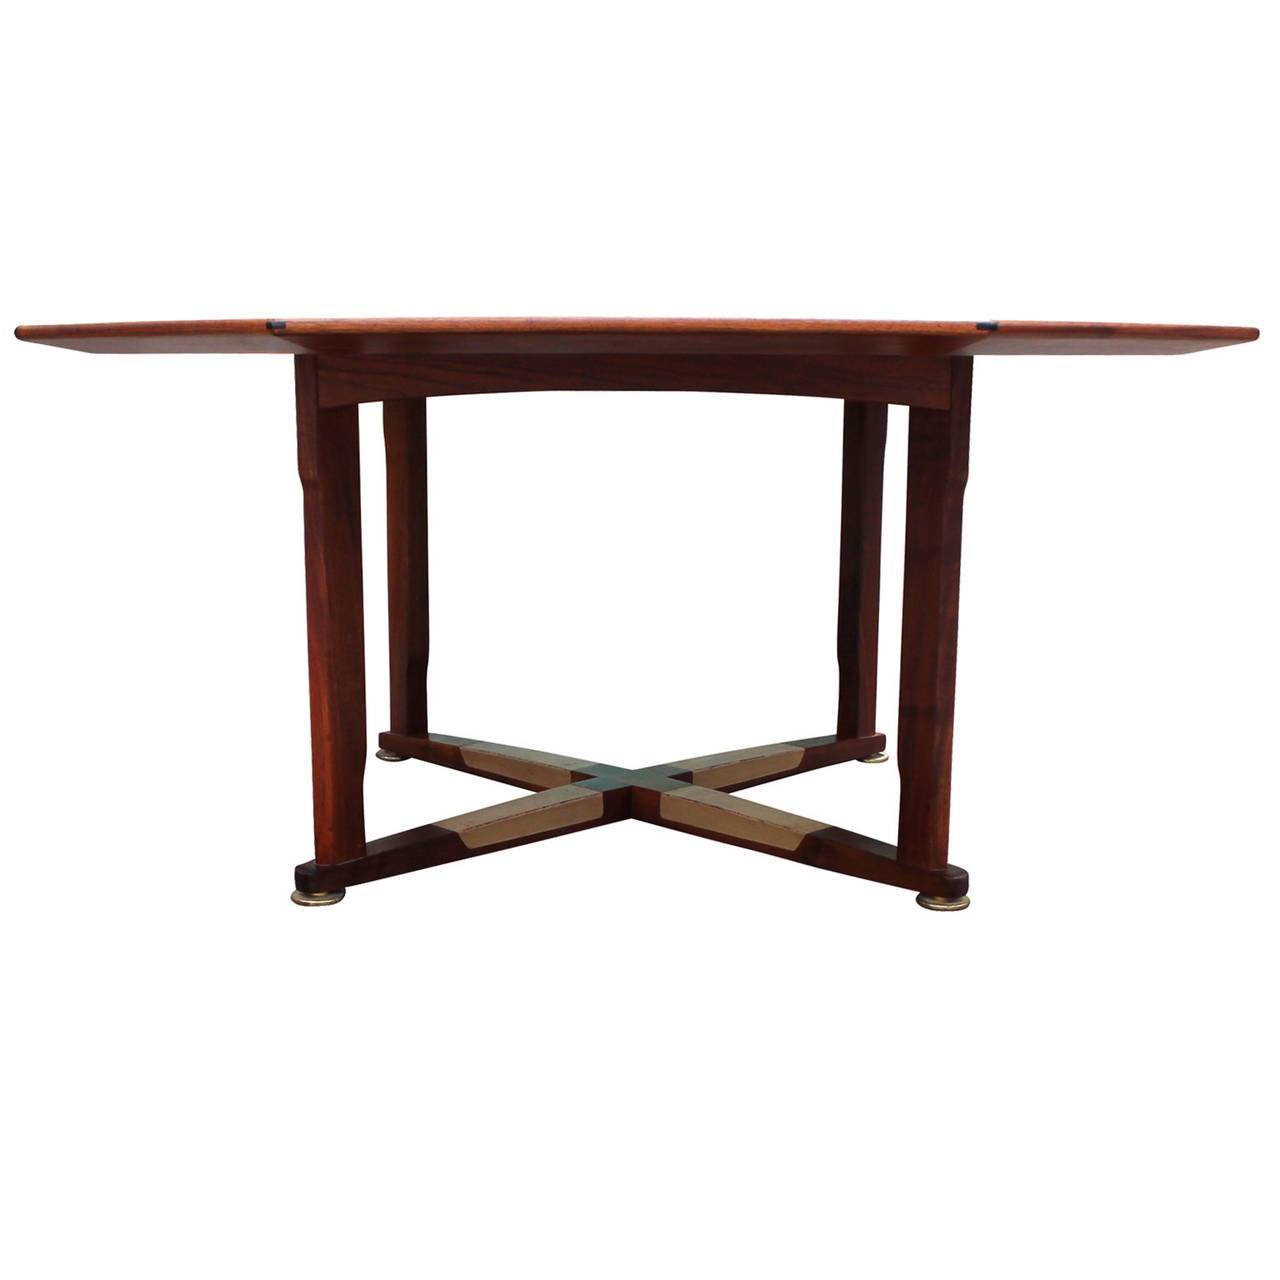 Octagon shaped game table designed by Edward Wormley for Dunbar. Mahogany top features a rosewood inlay. Base has leather detailing.